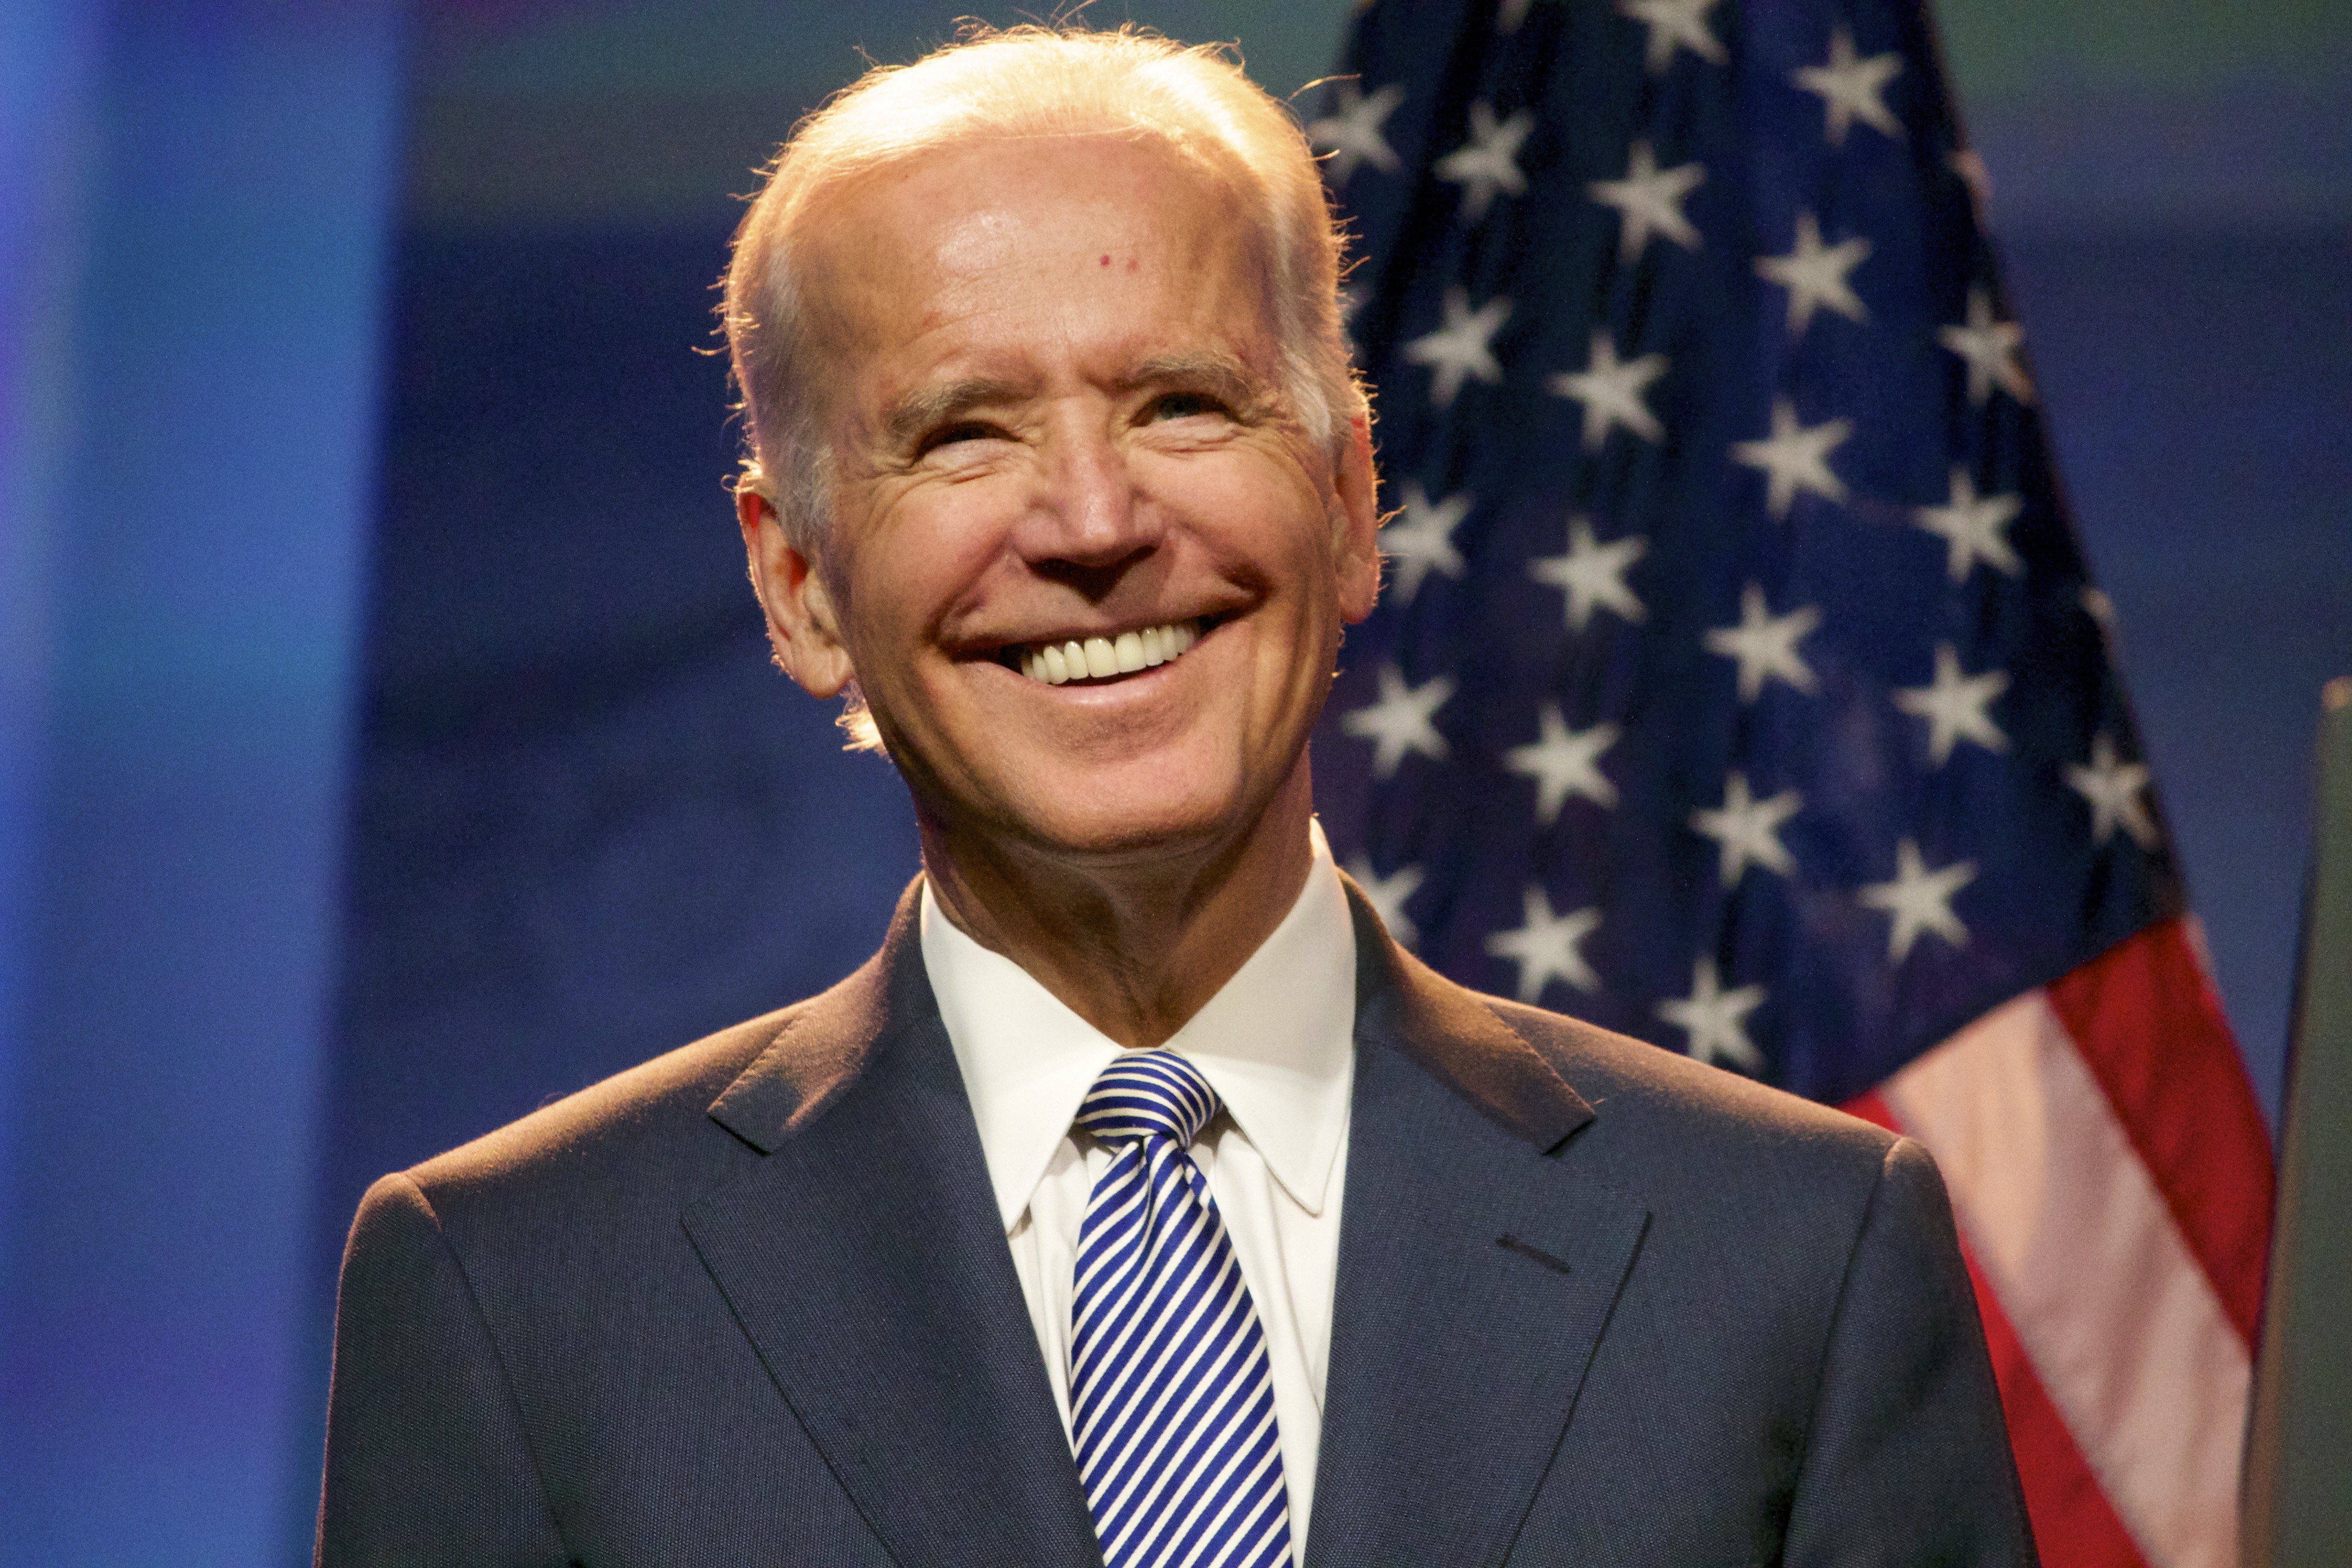 Biden can use executive powers to act on climate change, with or without Congress